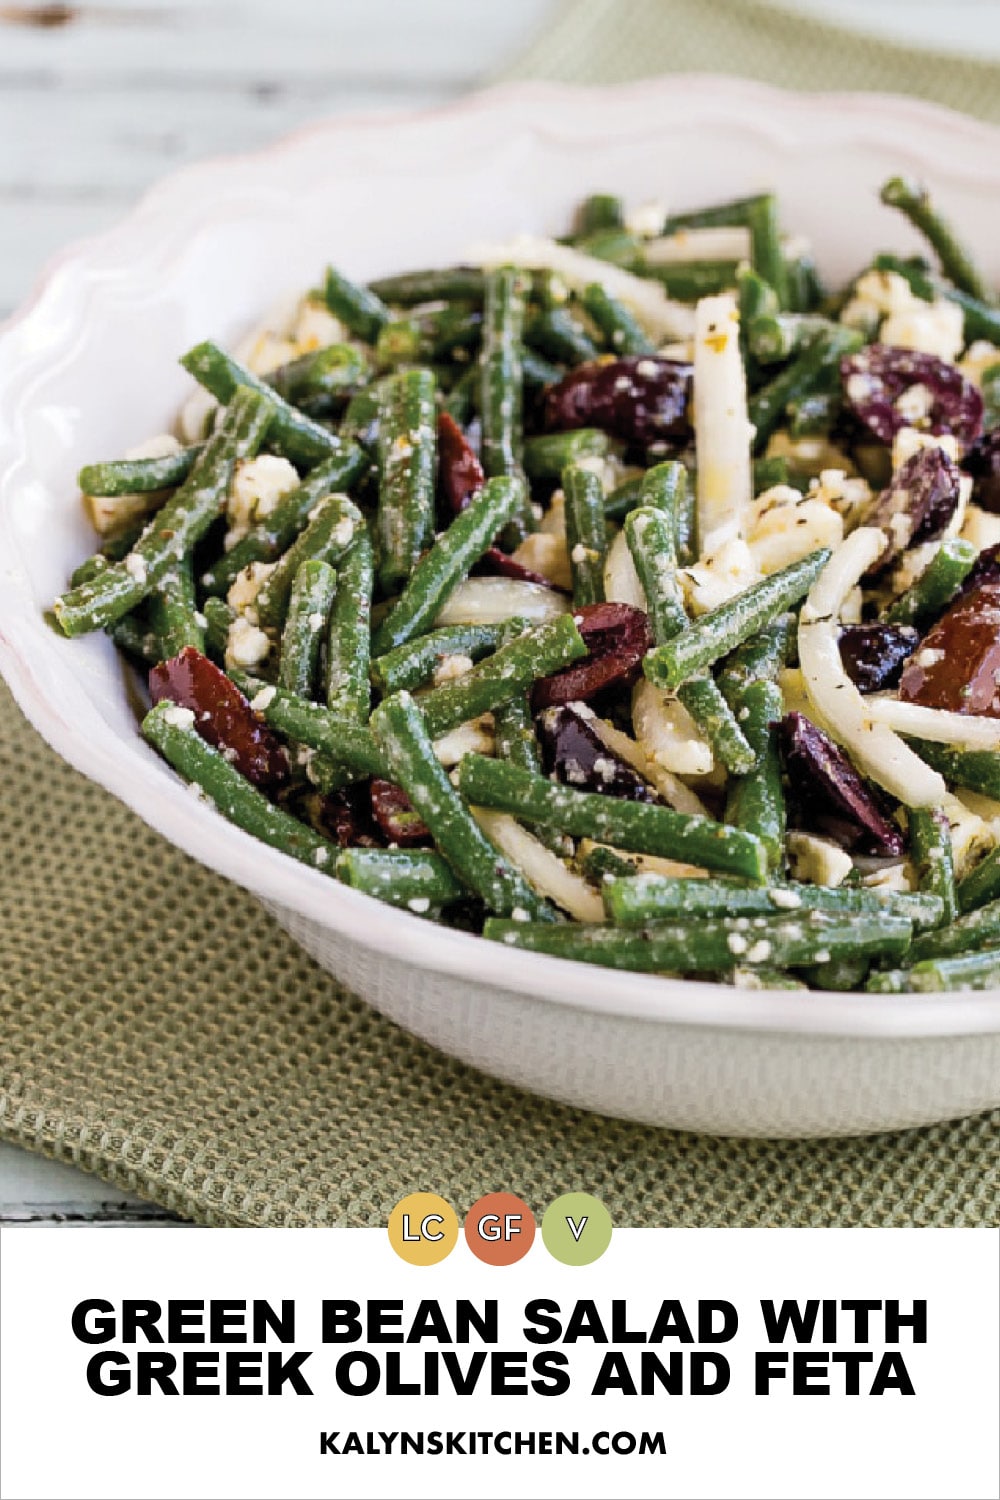 Pinterest image of Green Bean Salad with Greek Olives and Feta